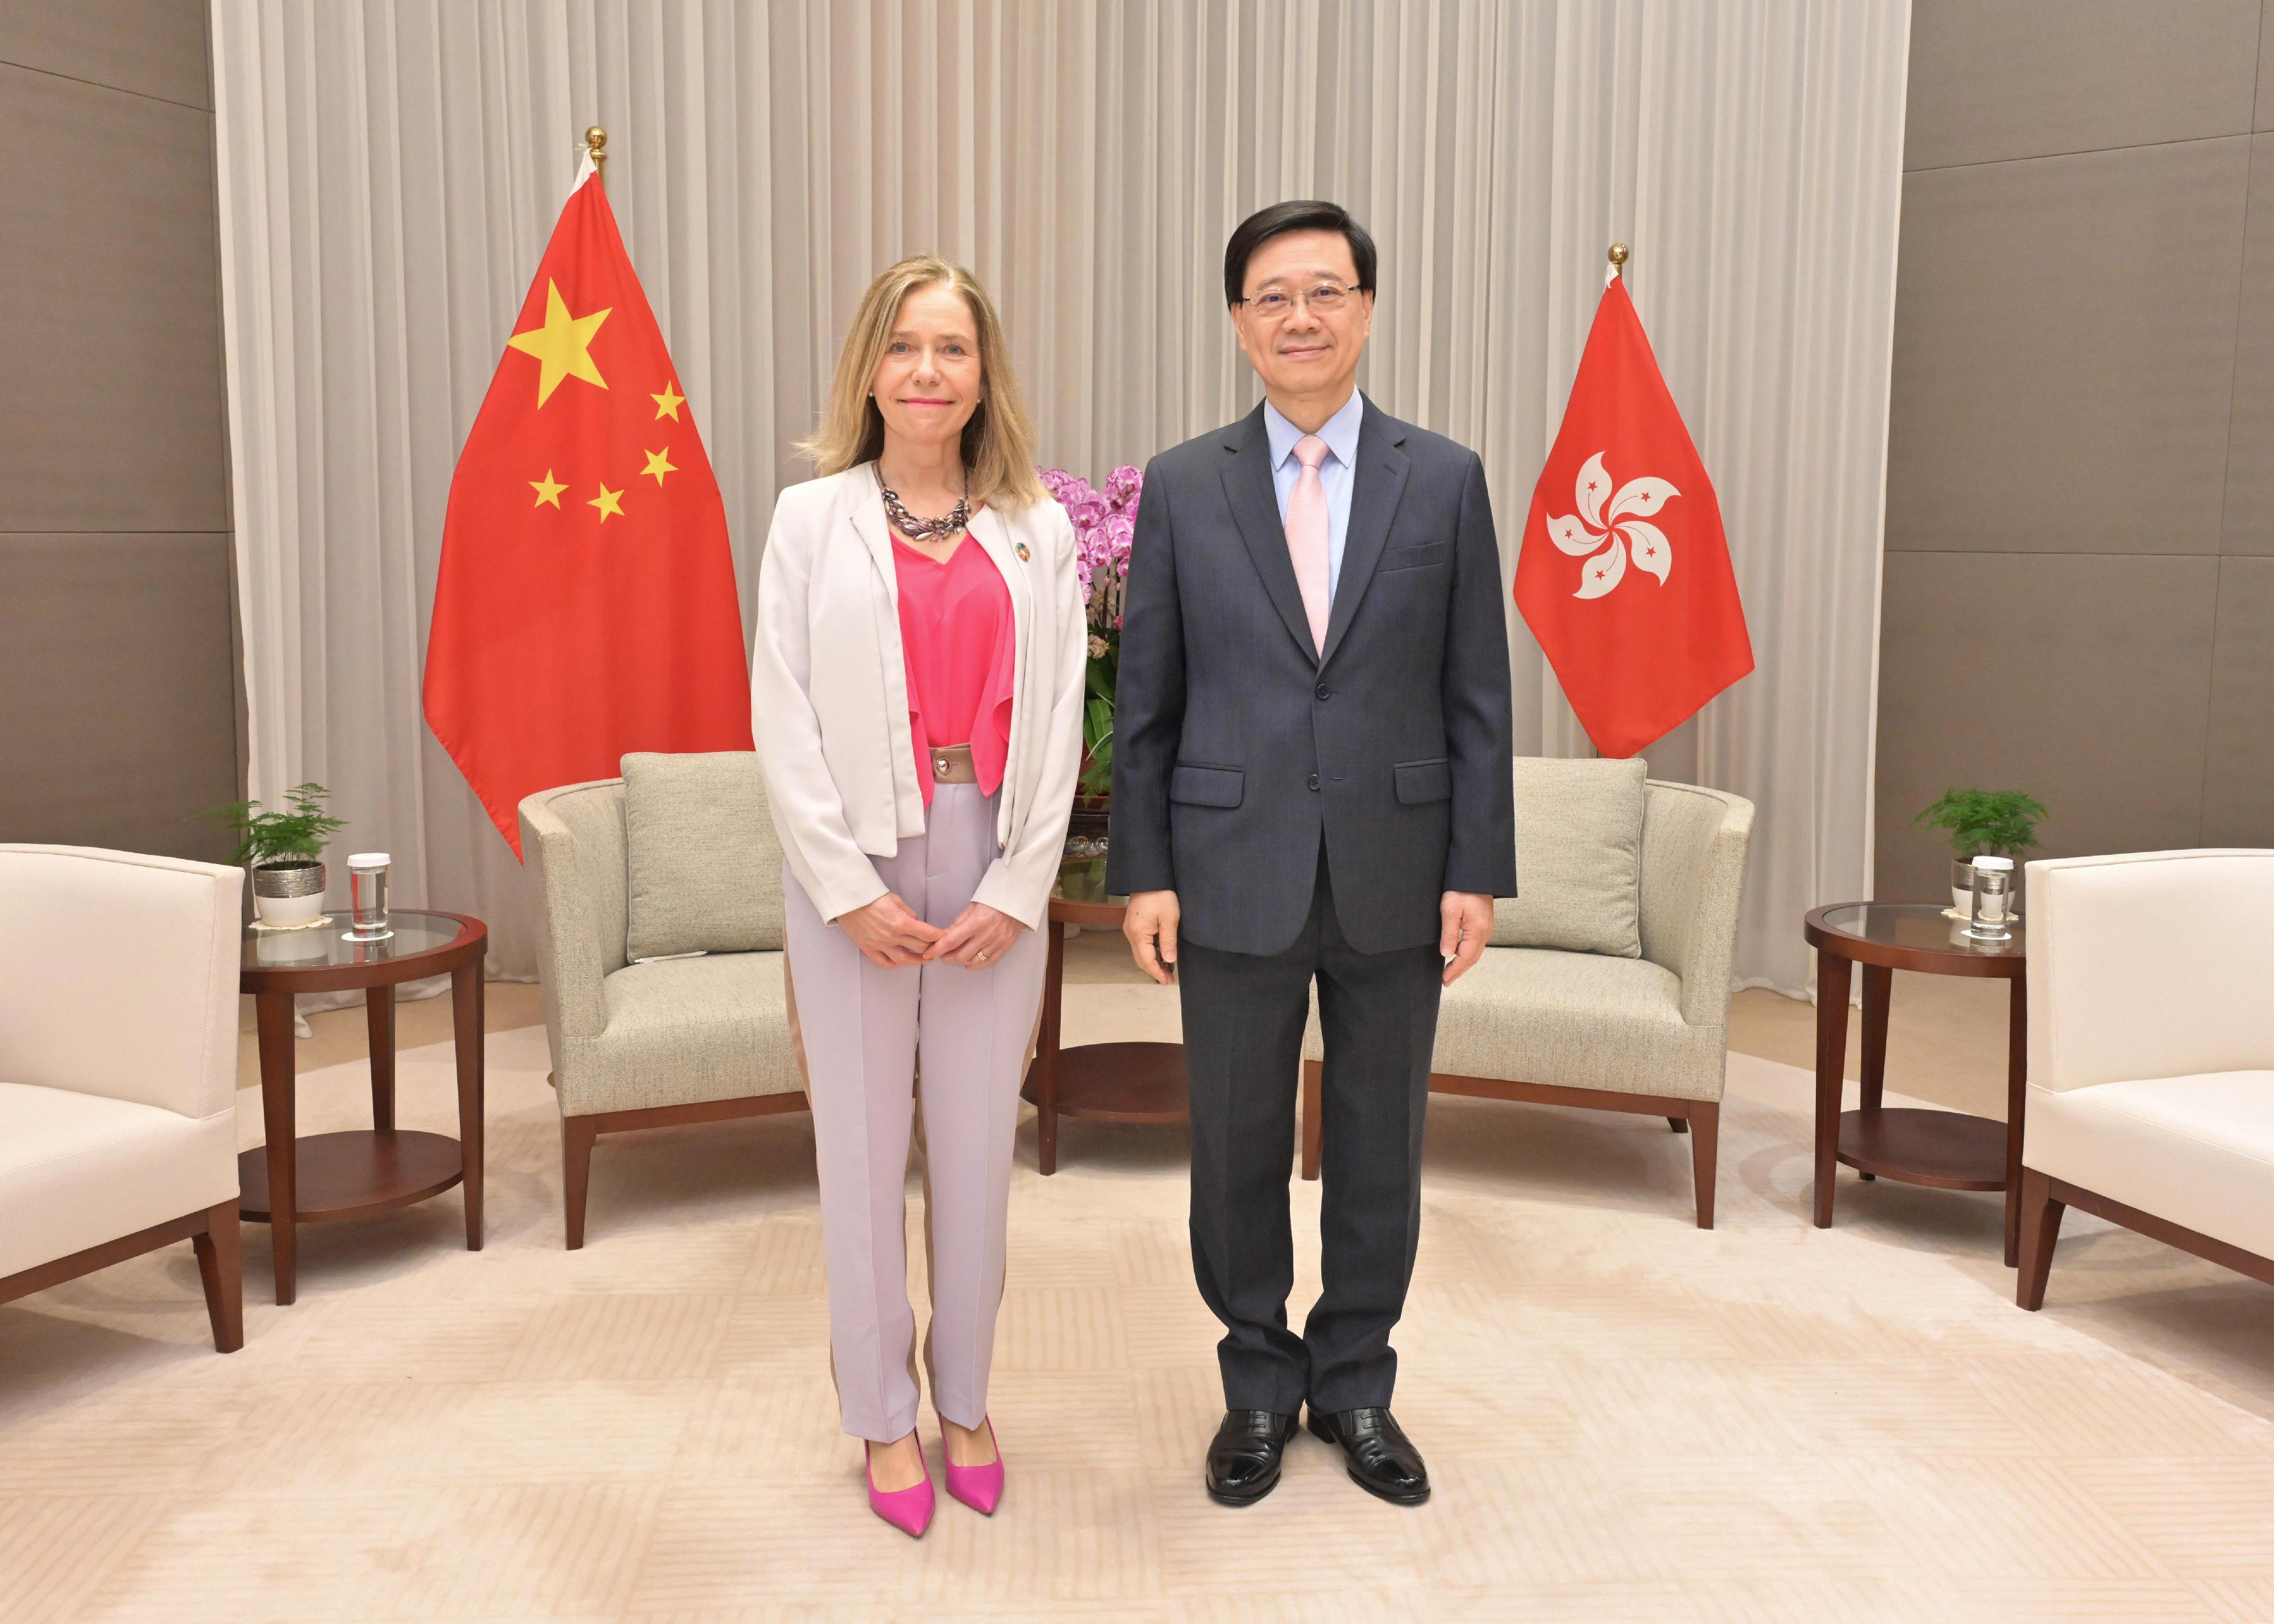 The Chief Executive, Mr John Lee (right), meets the Secretary-General of the World Meteorological Organization, Professor Celeste Saulo (left), today (March 28).